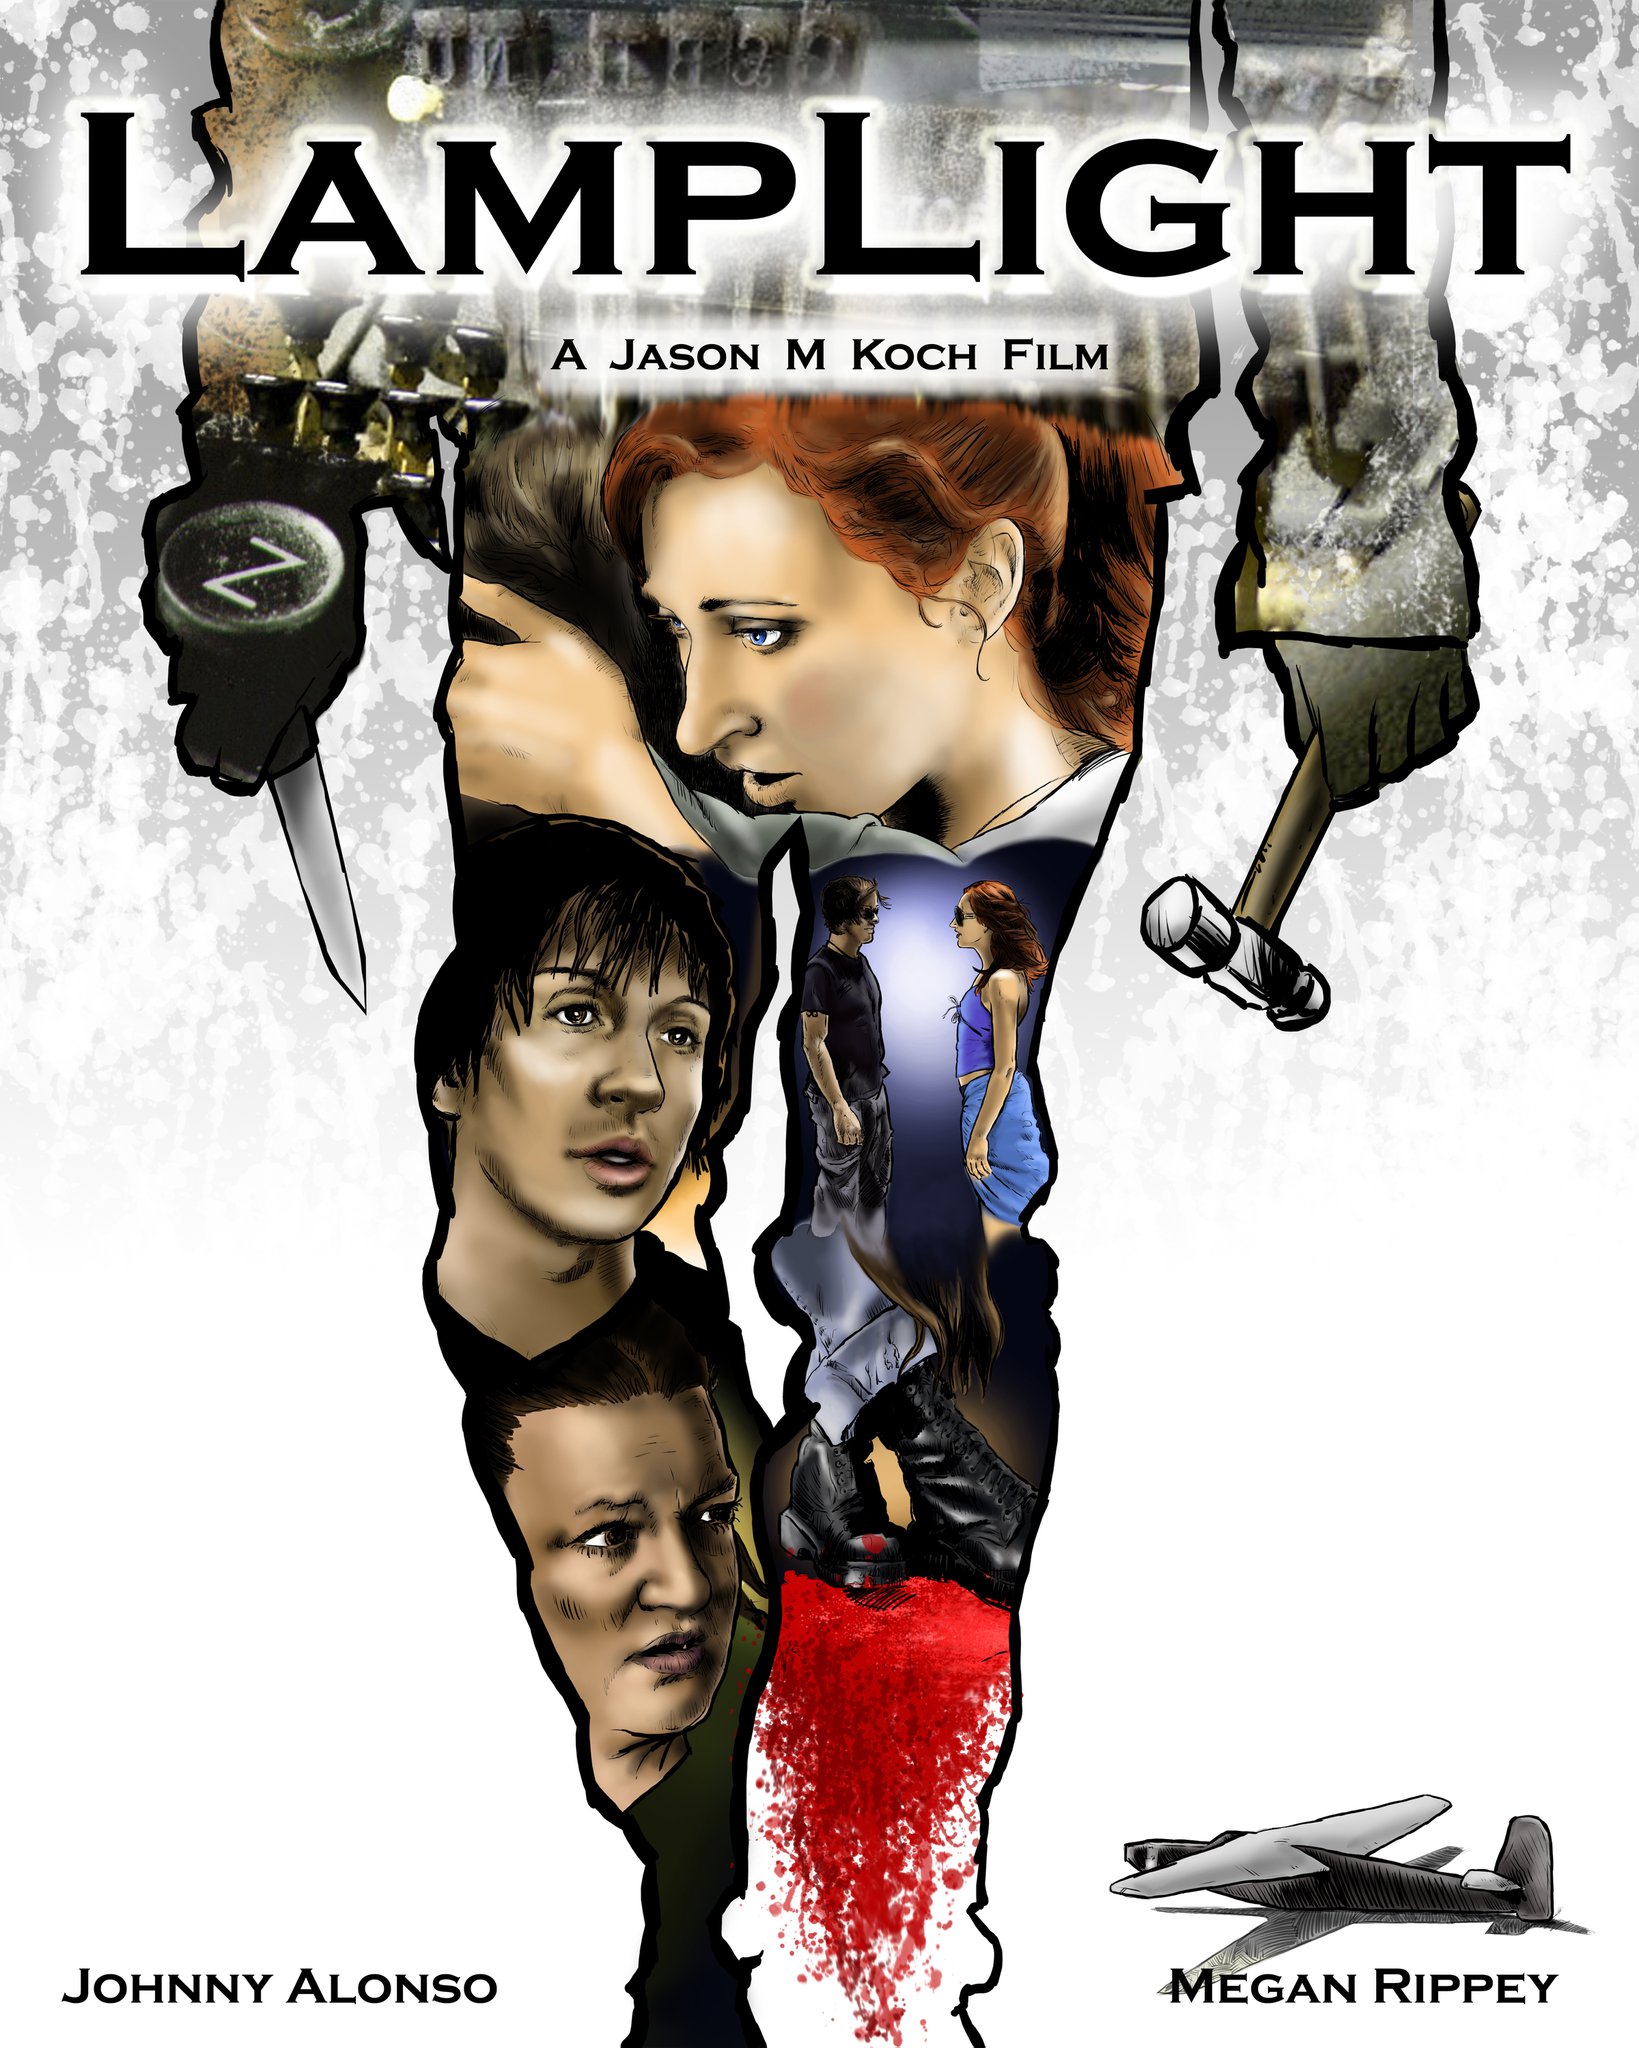 Official Lamplight Poster Starring Johnny Alonso & Megan Rippey. Directed by Jason M. Koch